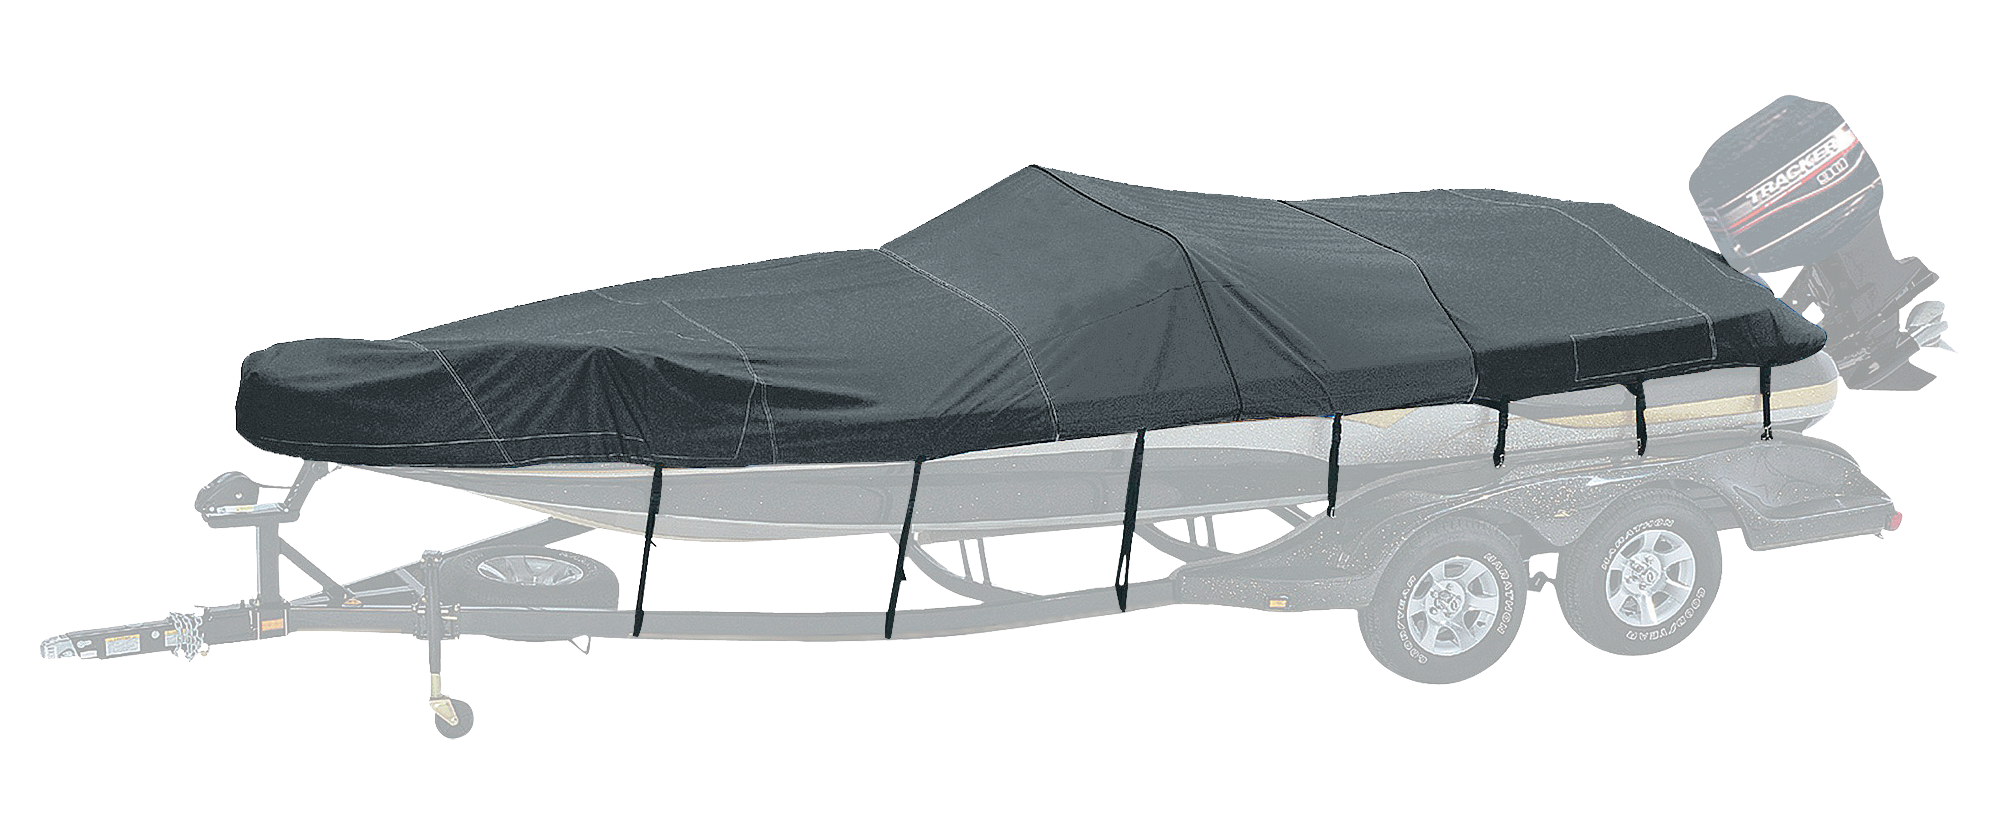 Bass Pro Shops Exact Fit Custom Boat Cover by Westland - Tracker Boats - '04-'05 Tundra 20 Sport - Charcoal